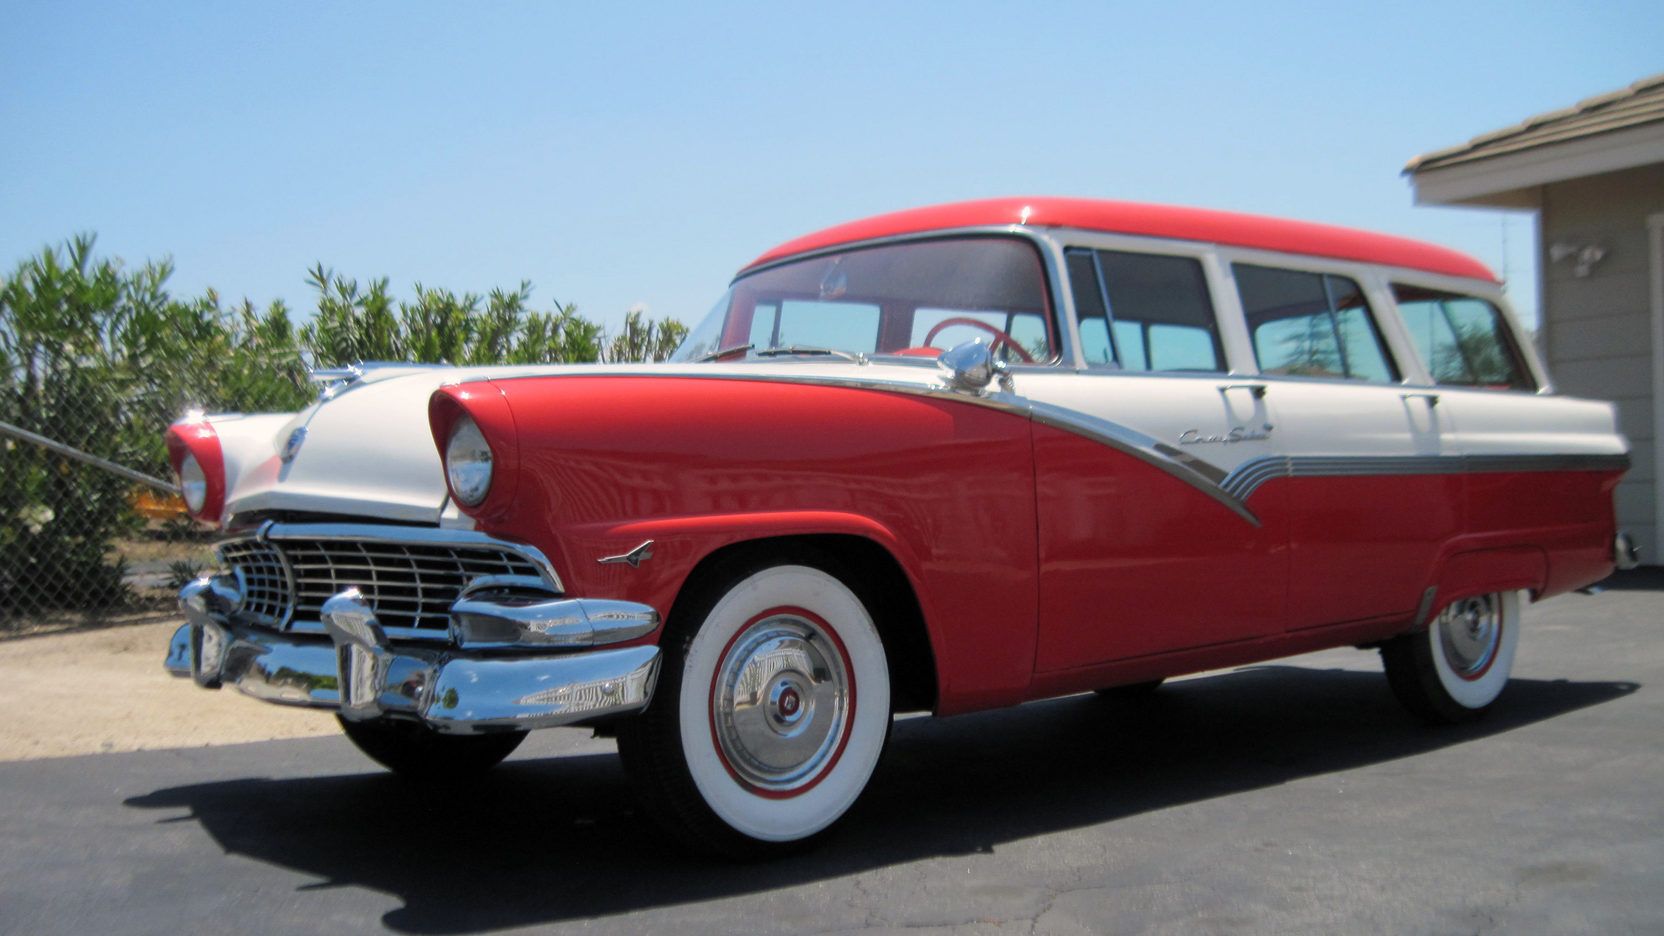 Red 1959 Ford Country Sedan Wagon parked